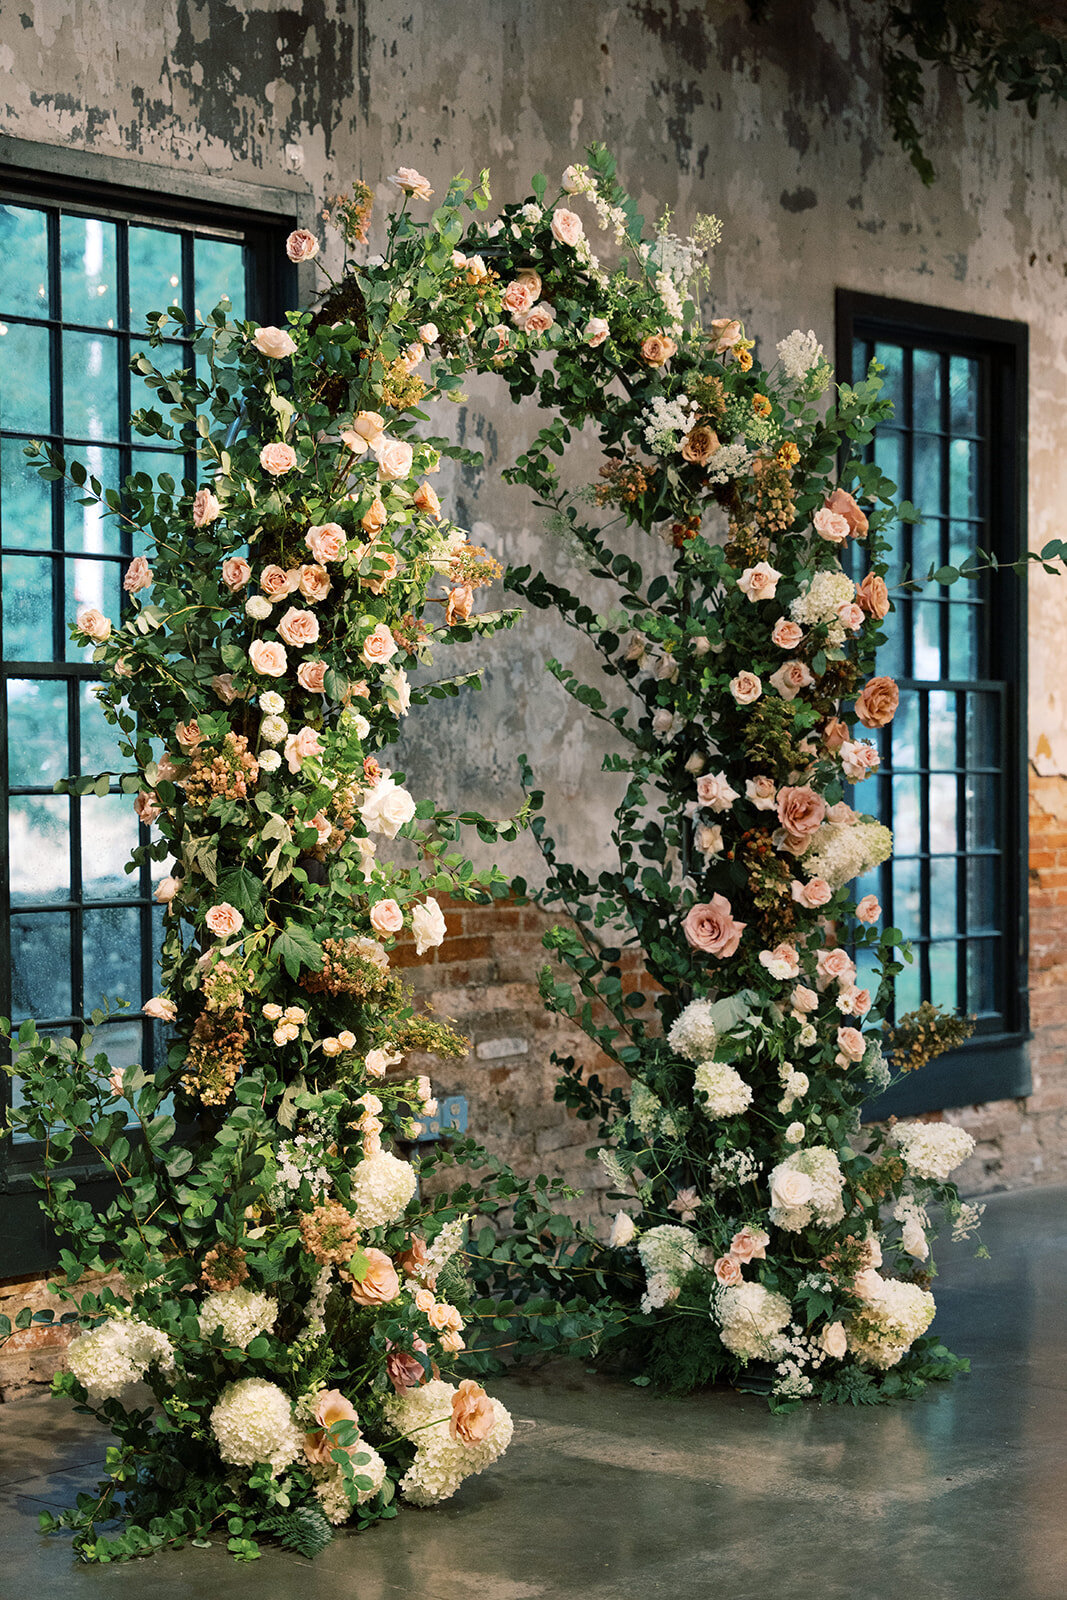 Full floral arch including white, blush, and peach garden roses, hydrangea, and lush vining greenery.